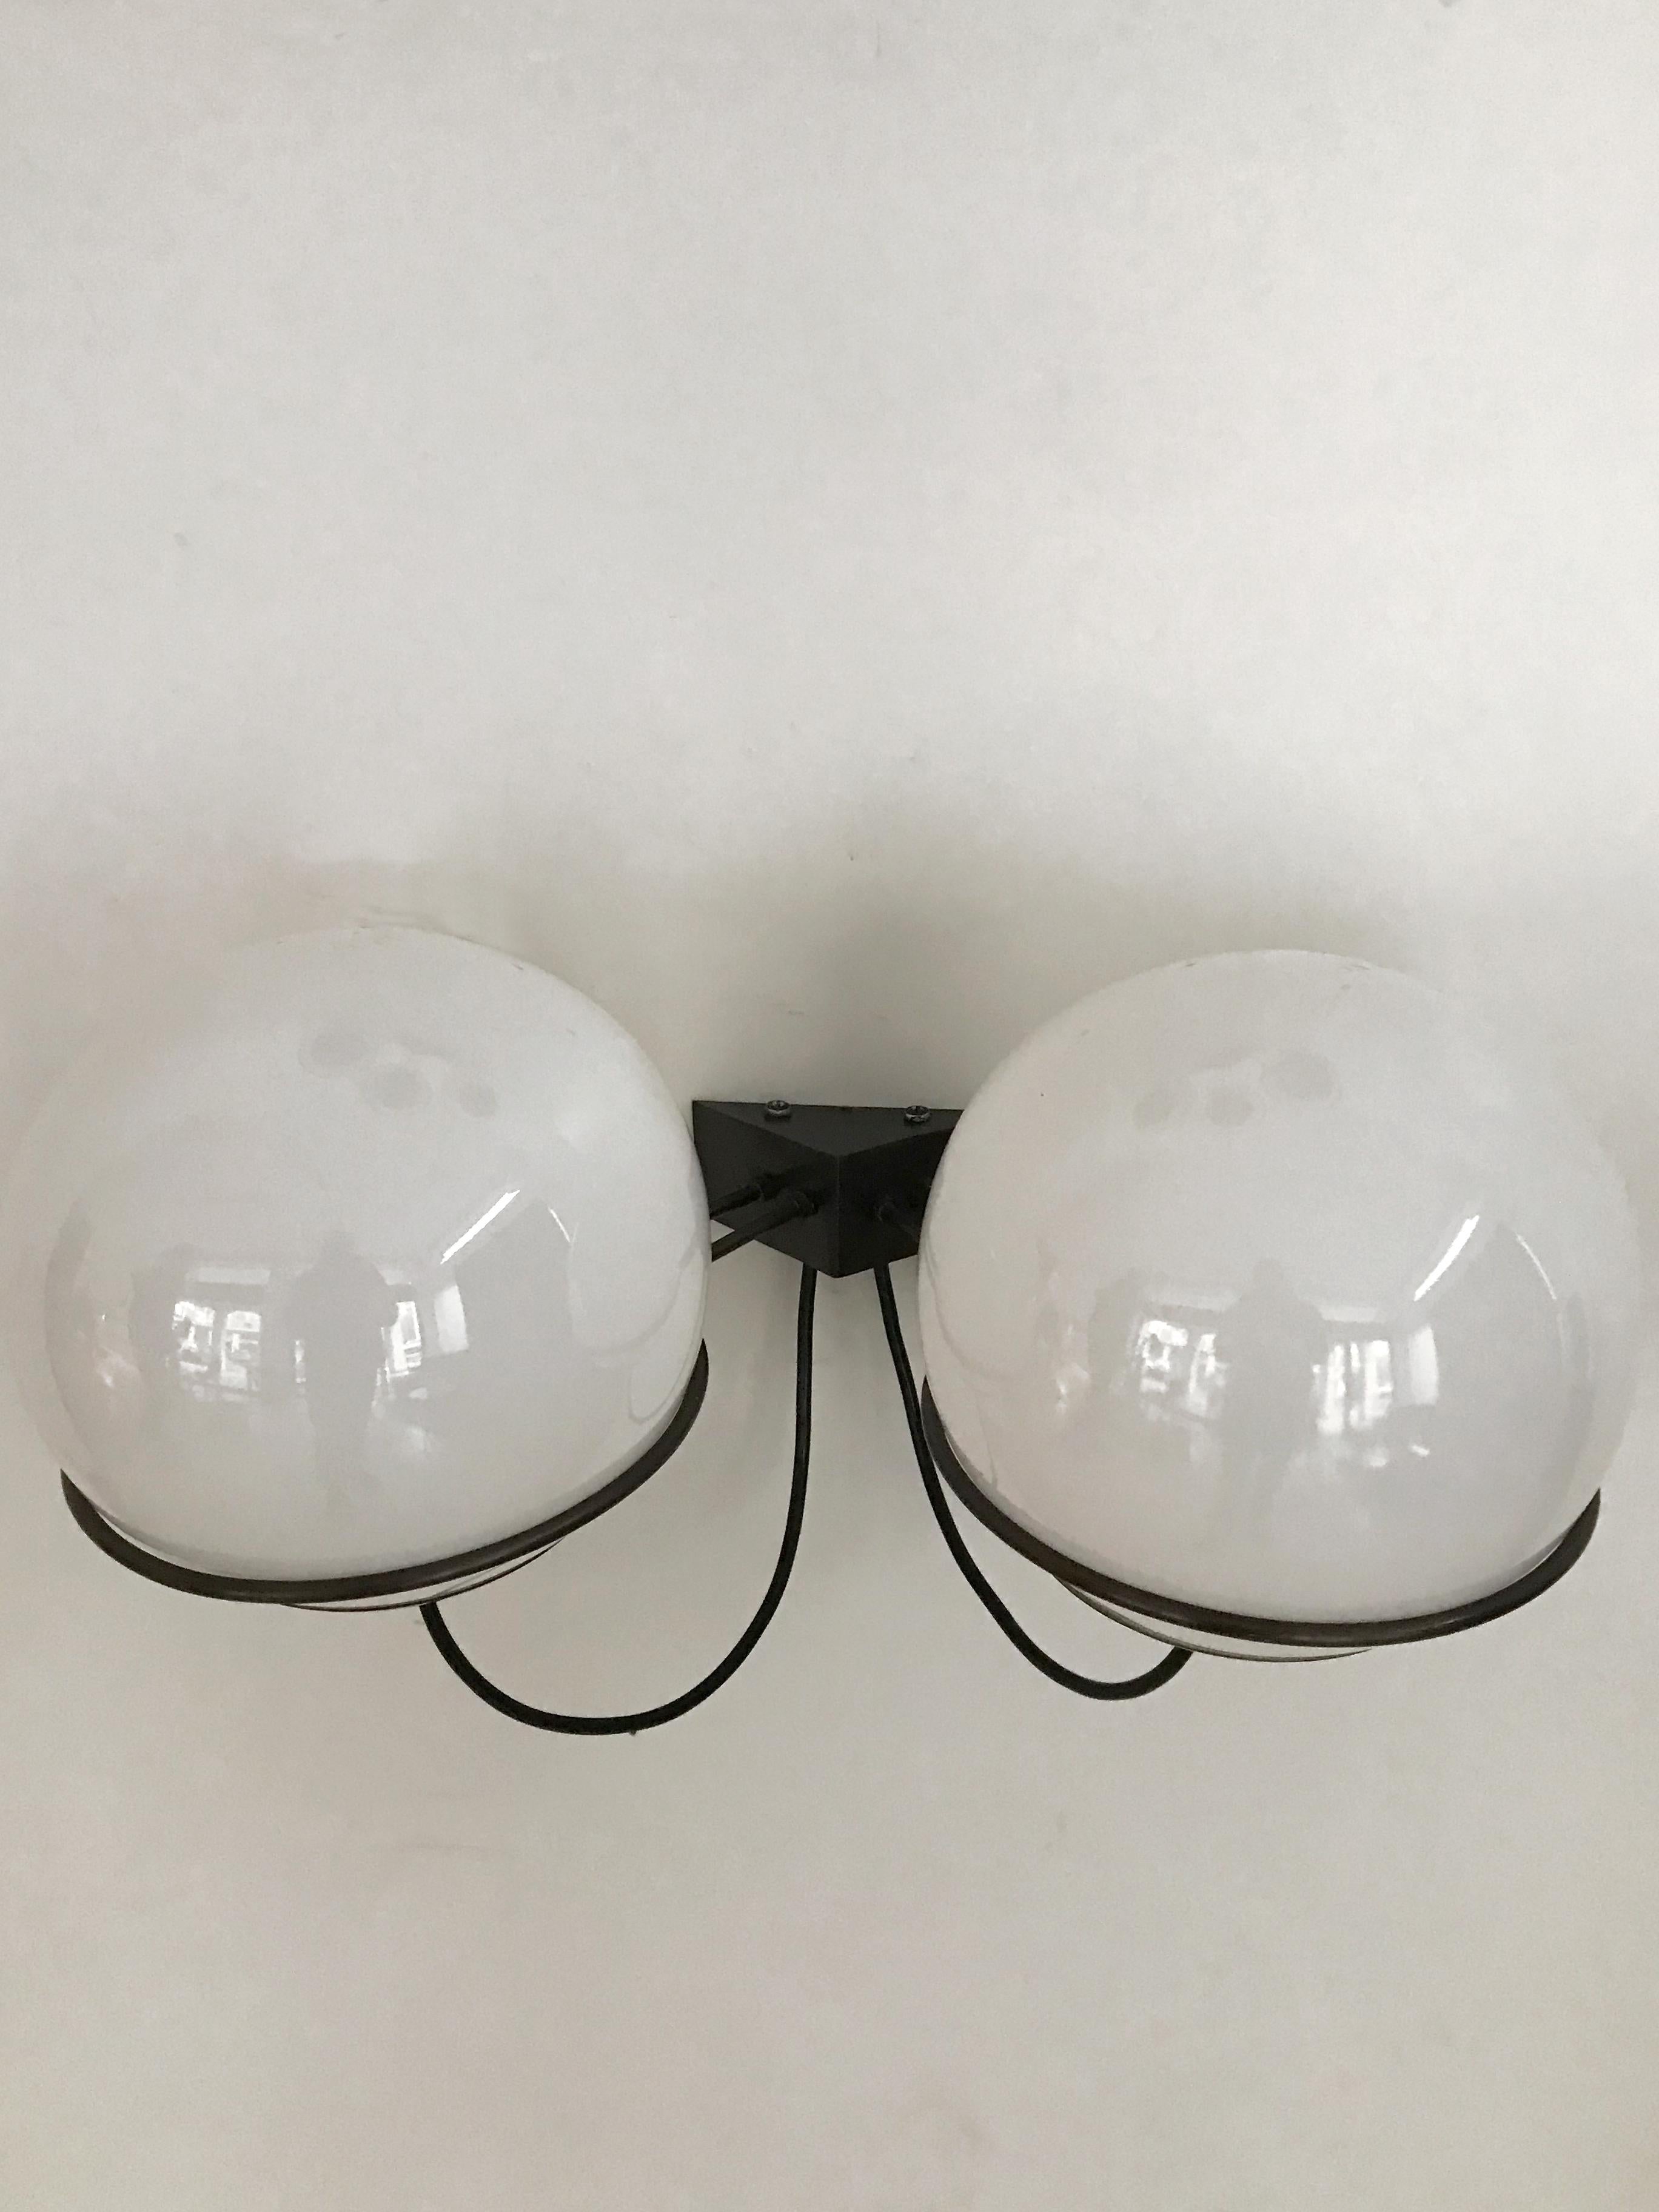 Midcentury Italian Candle Metal Glass Sconce Wall Light 1960s In Good Condition For Sale In Reggio Emilia, IT